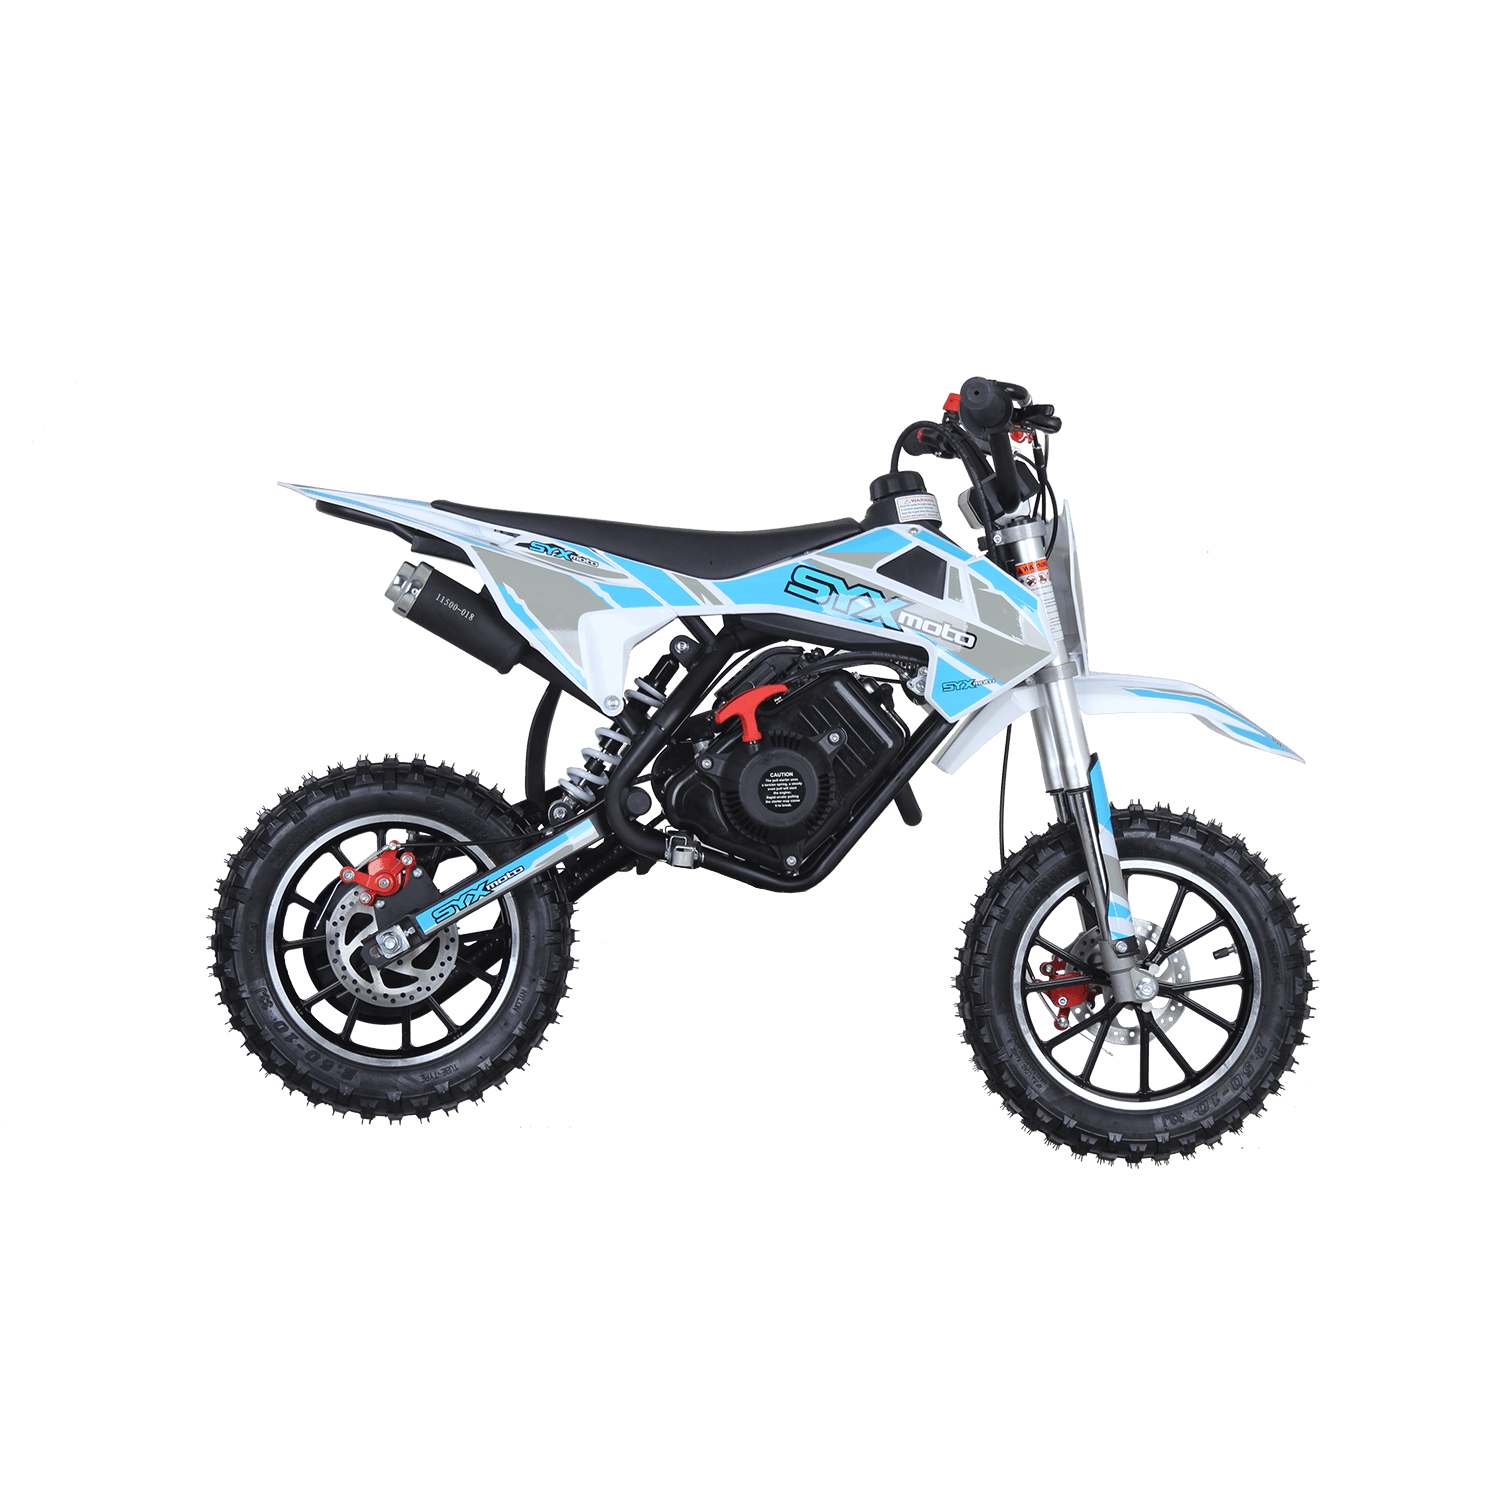 FRP Mini Gas Pocket Bike 03 On 50cc 2 Stroke, Support Up to 165